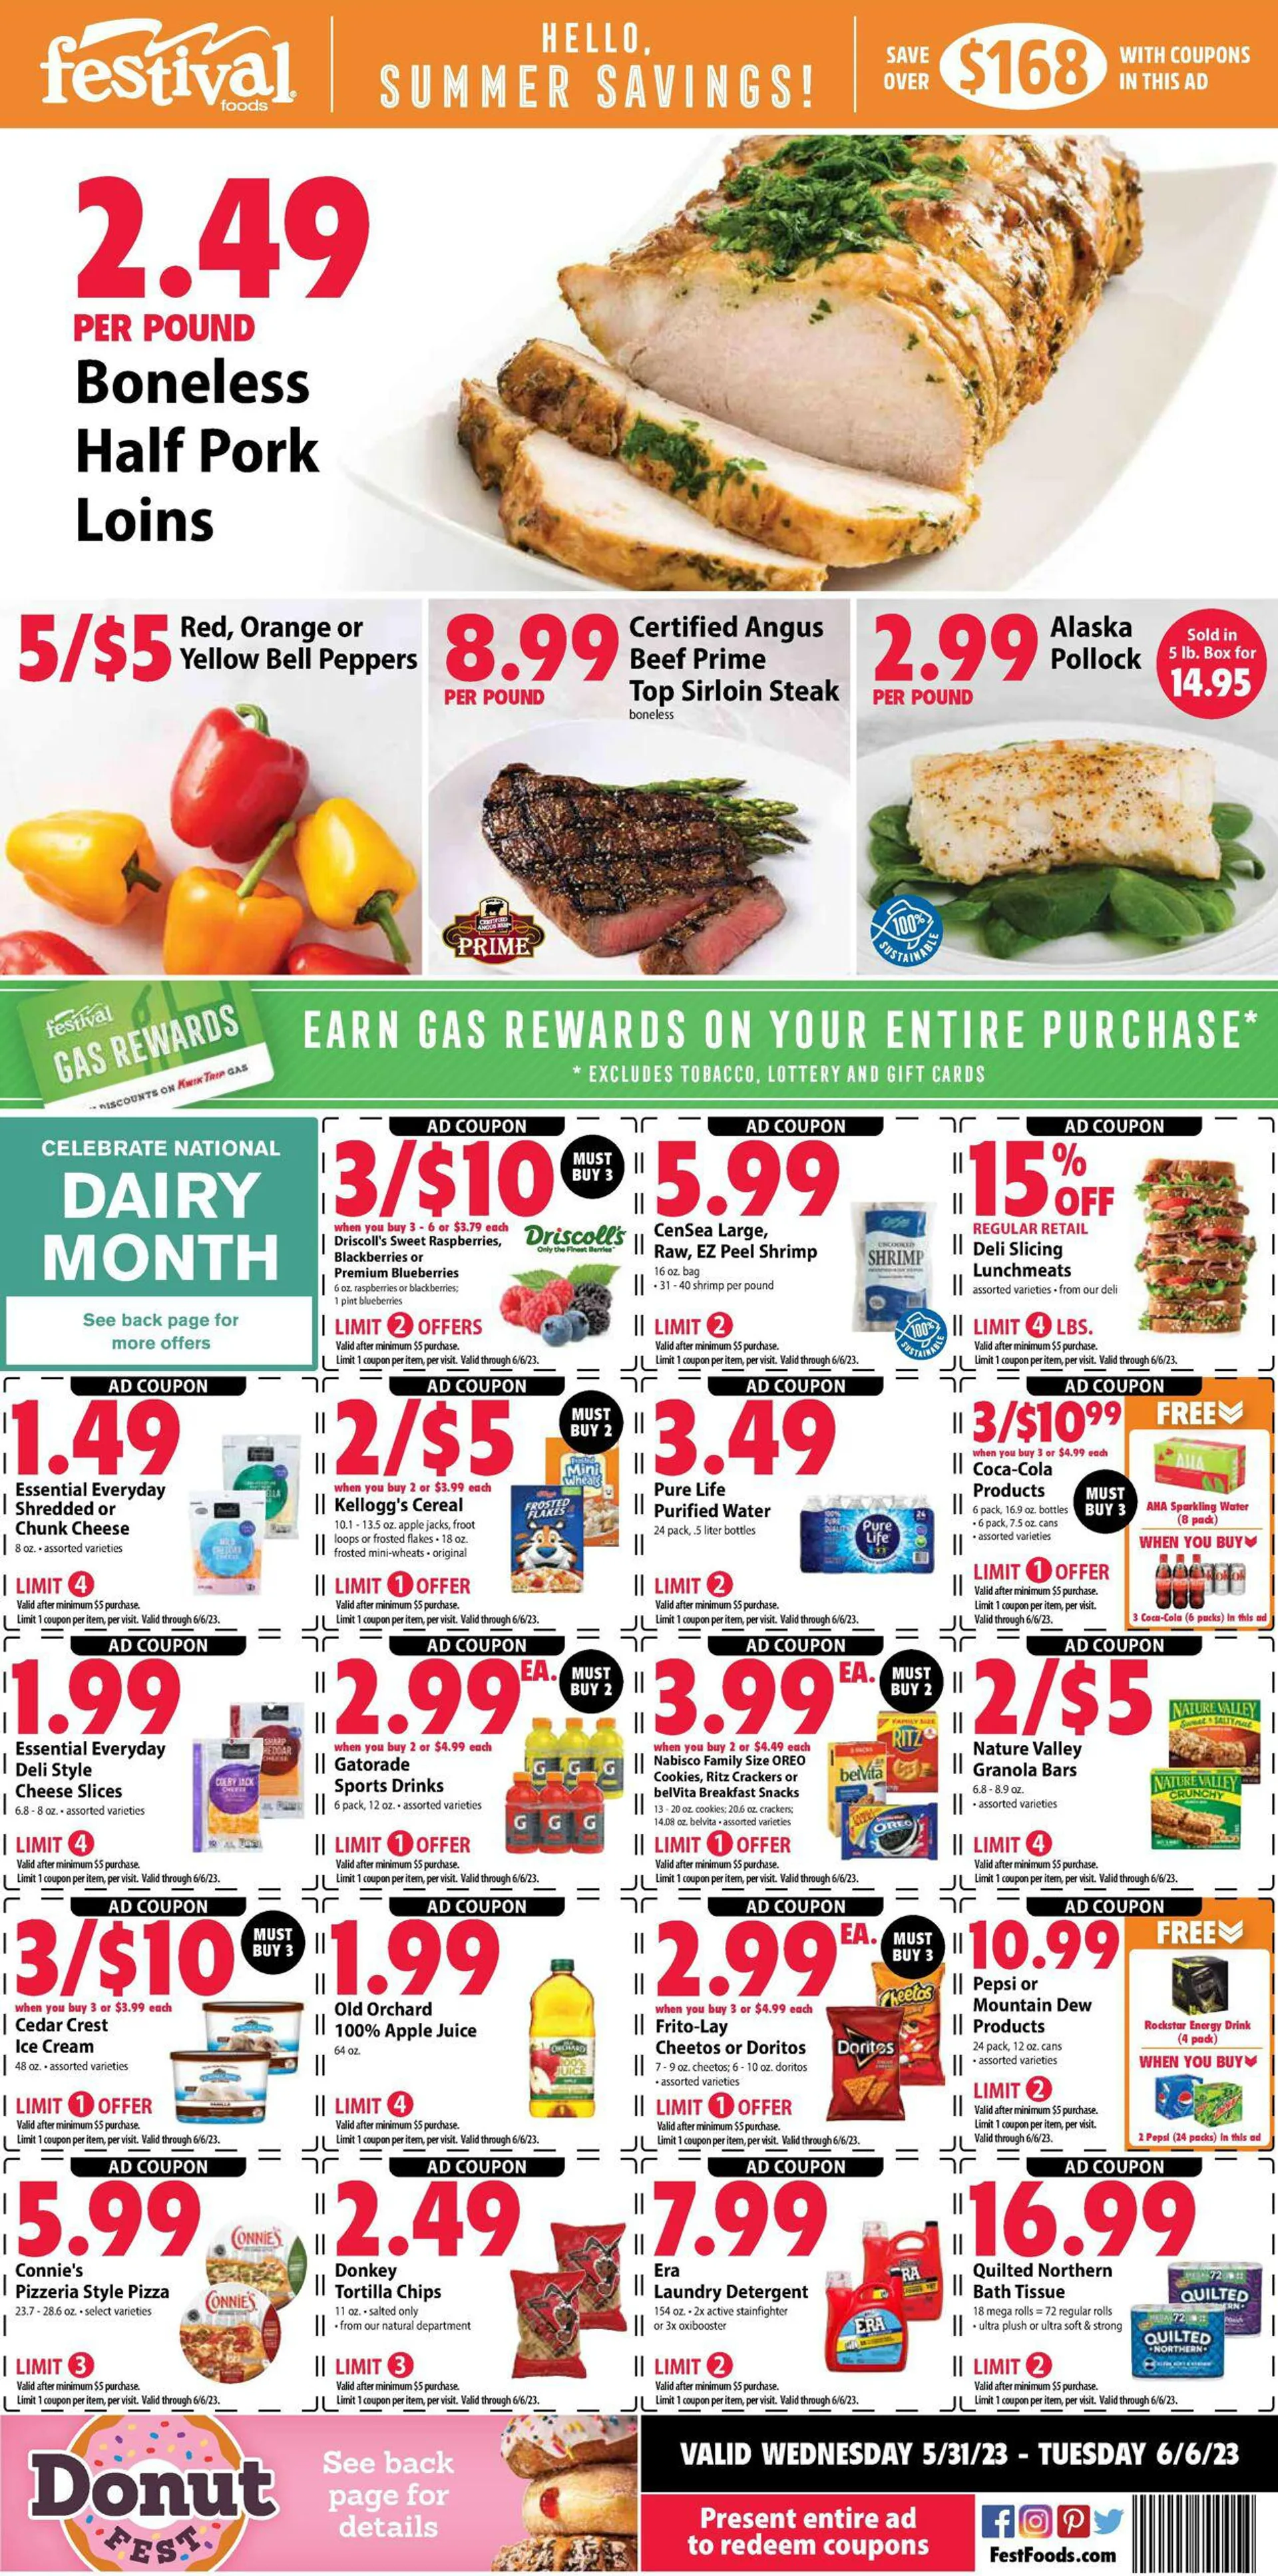 Festival Foods Current weekly ad - 1